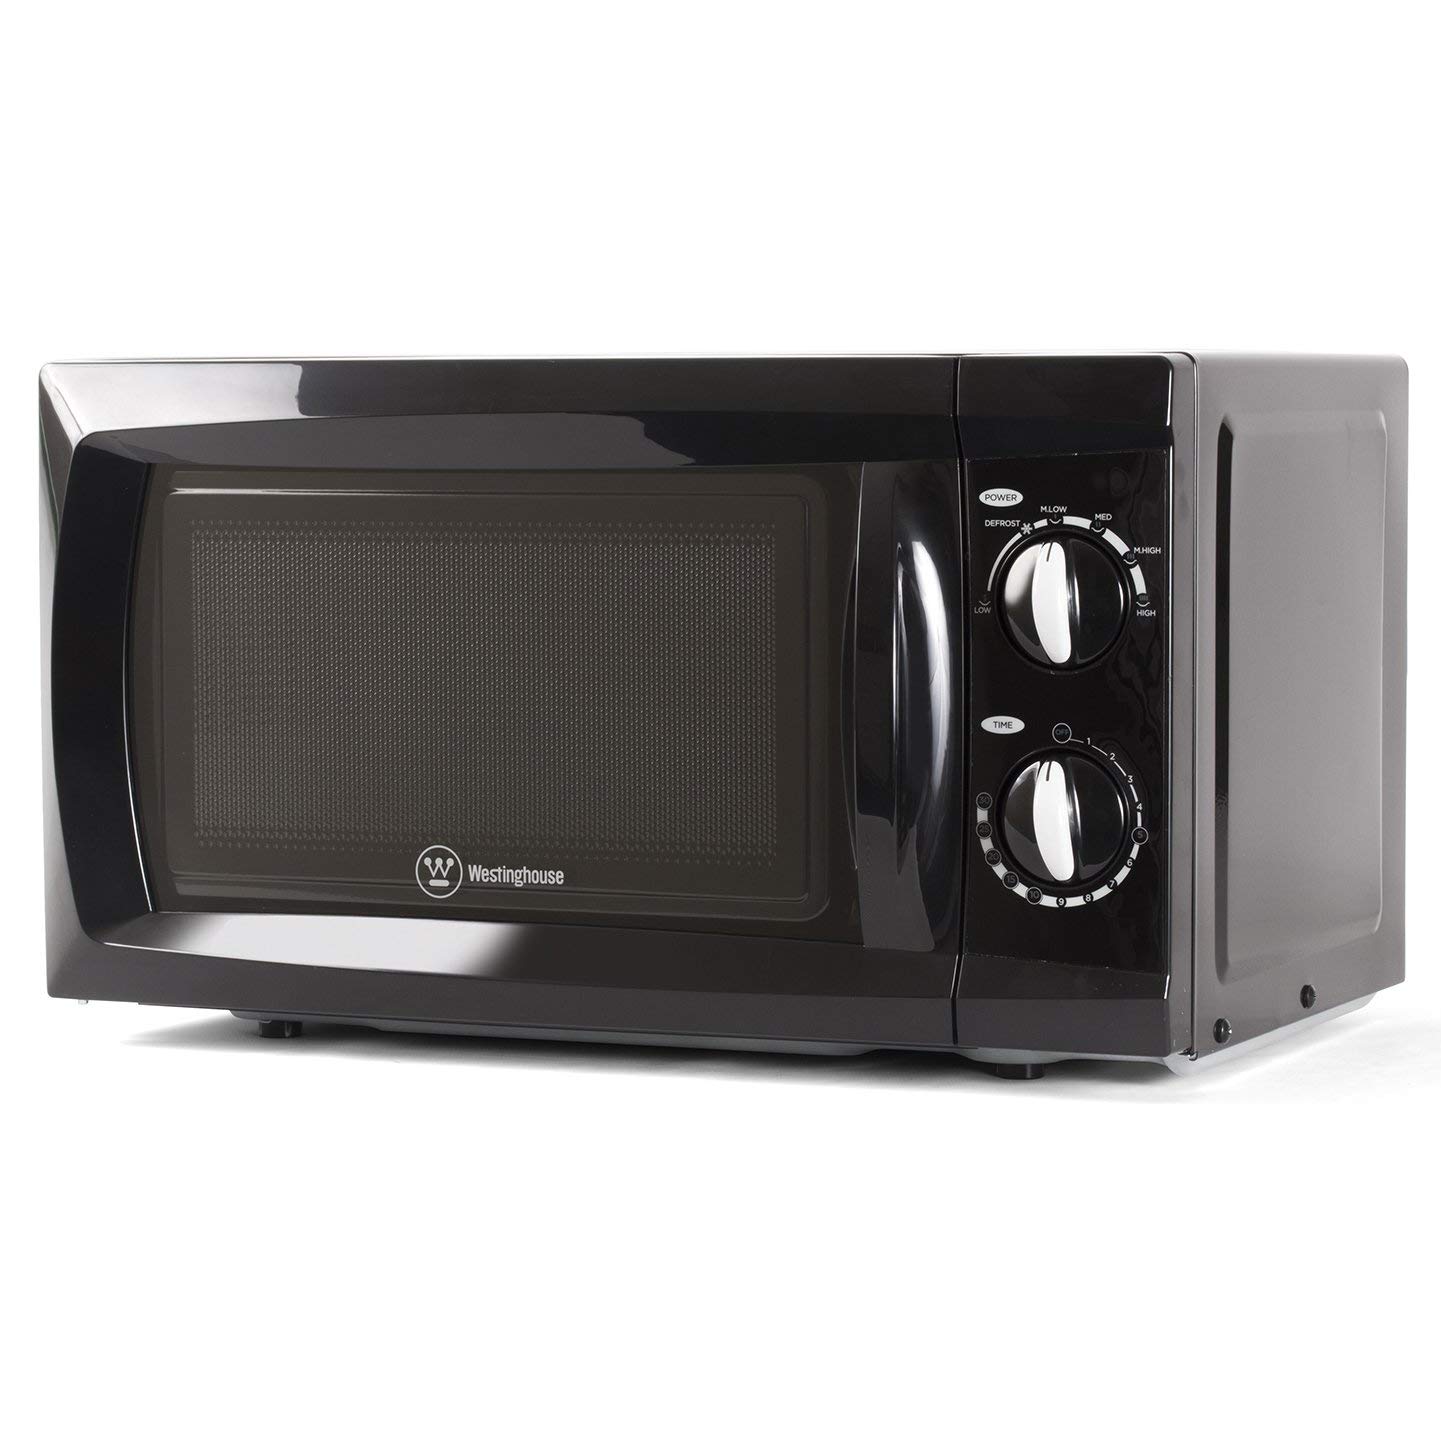 Top 10 Best Microwave Convection Oven In 2020 Top Best Pro Reivews